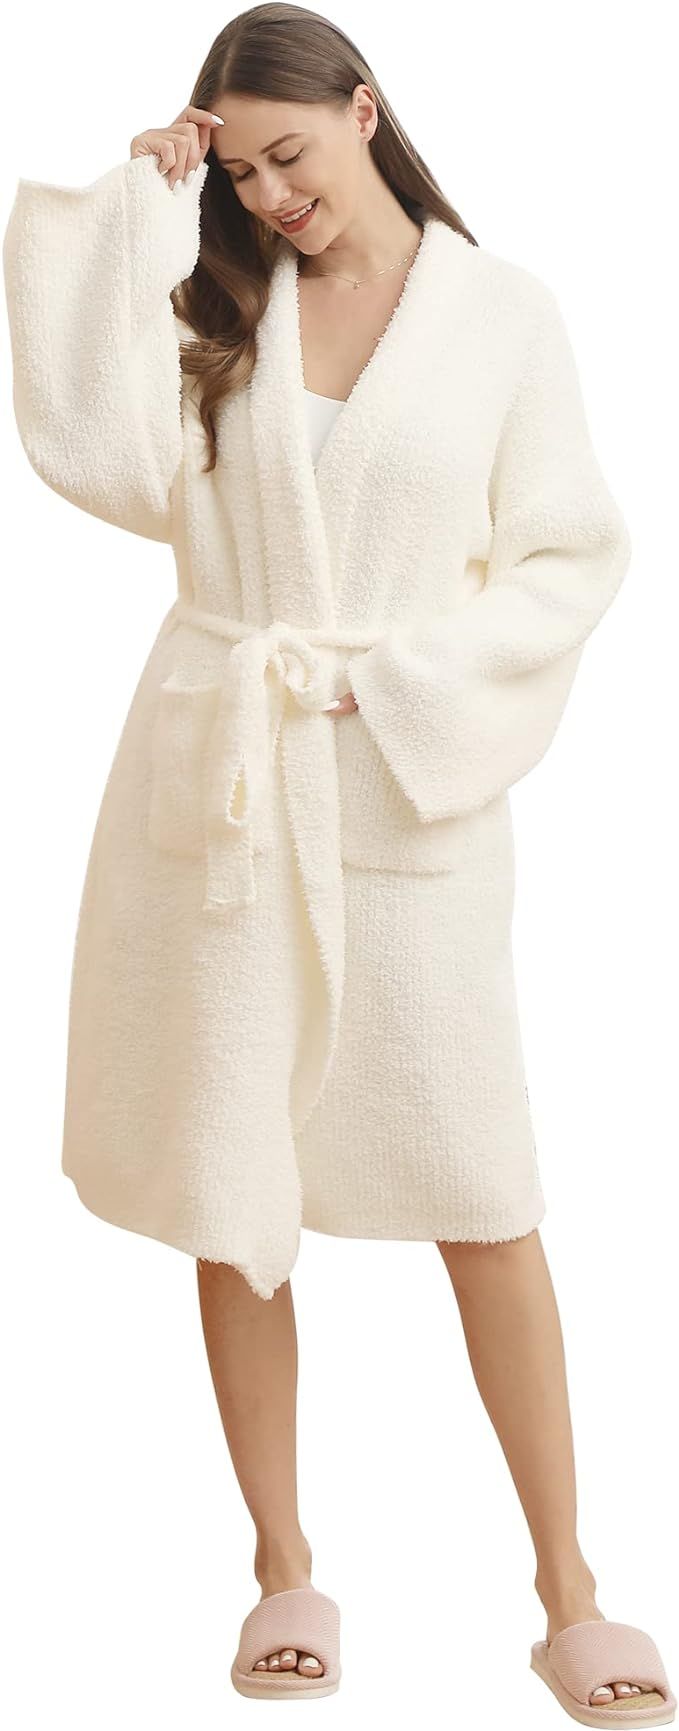 bearberry Hooded Robe Cozy Chic In The Wild Robe Lightweight Soft Plush Bathrobe with Pockets for... | Amazon (US)